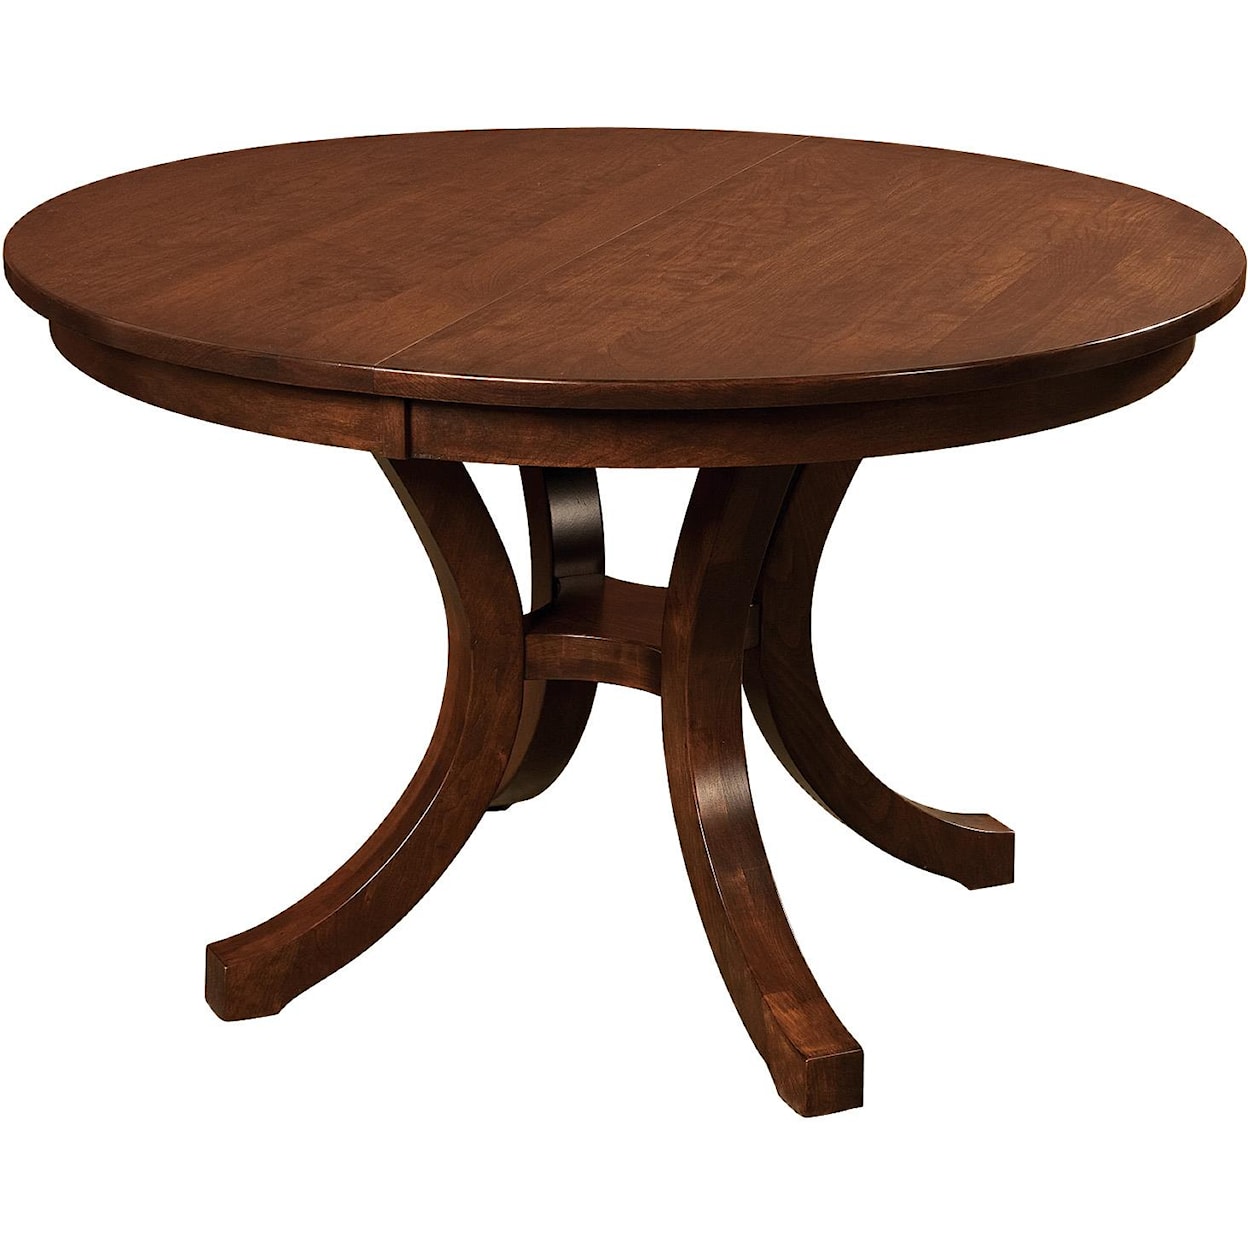 Amish Impressions by Fusion Designs Charleston 48" Round Single Pedestal Table